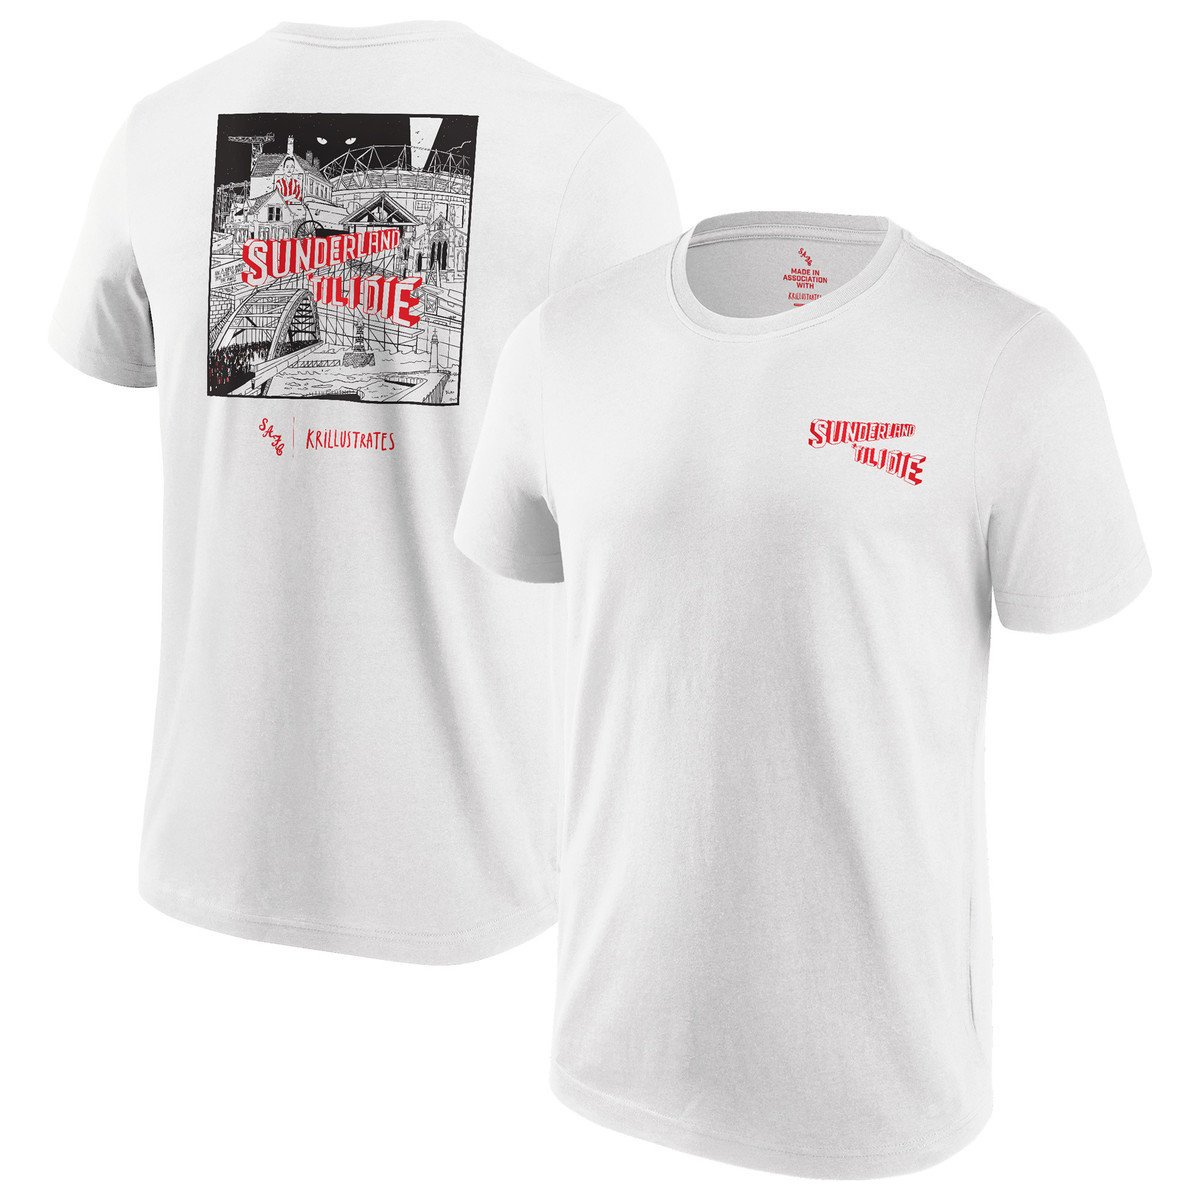 Buy the STID WHITE GRAPHIC TEE S online at Sunderland AFC Store